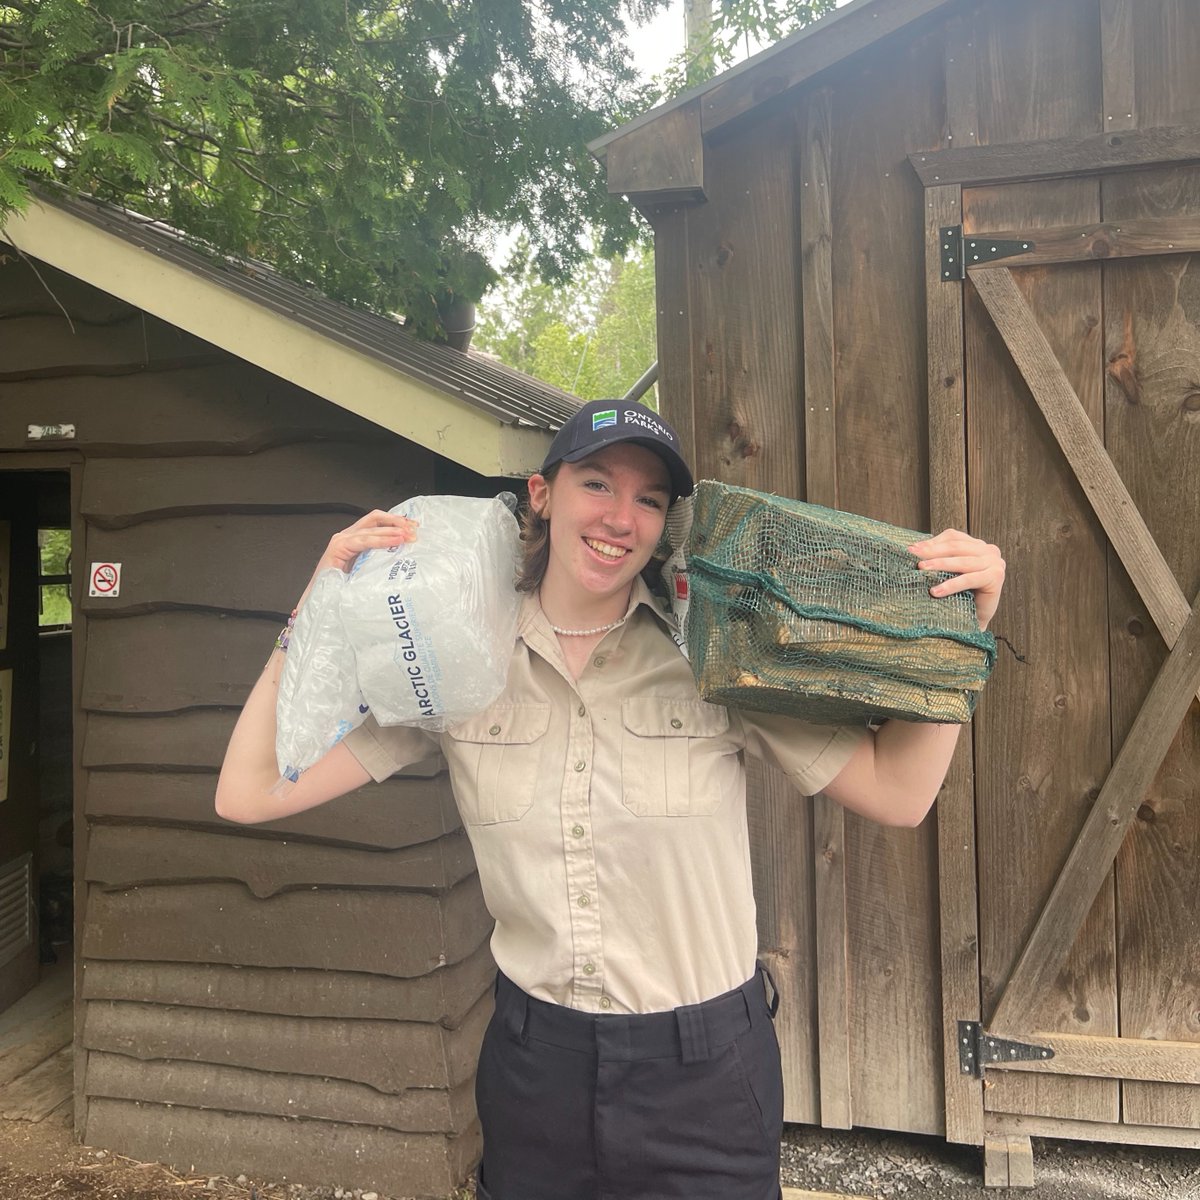 #StaffSunday

Meet Nikki! One of Rideau River's Gate Attendants. This is Nikki's first year working for Ontario Parks!
Nikki's favourite part about working at Rideau River is meeting new people and being able to communicate in French and English with our visitors!